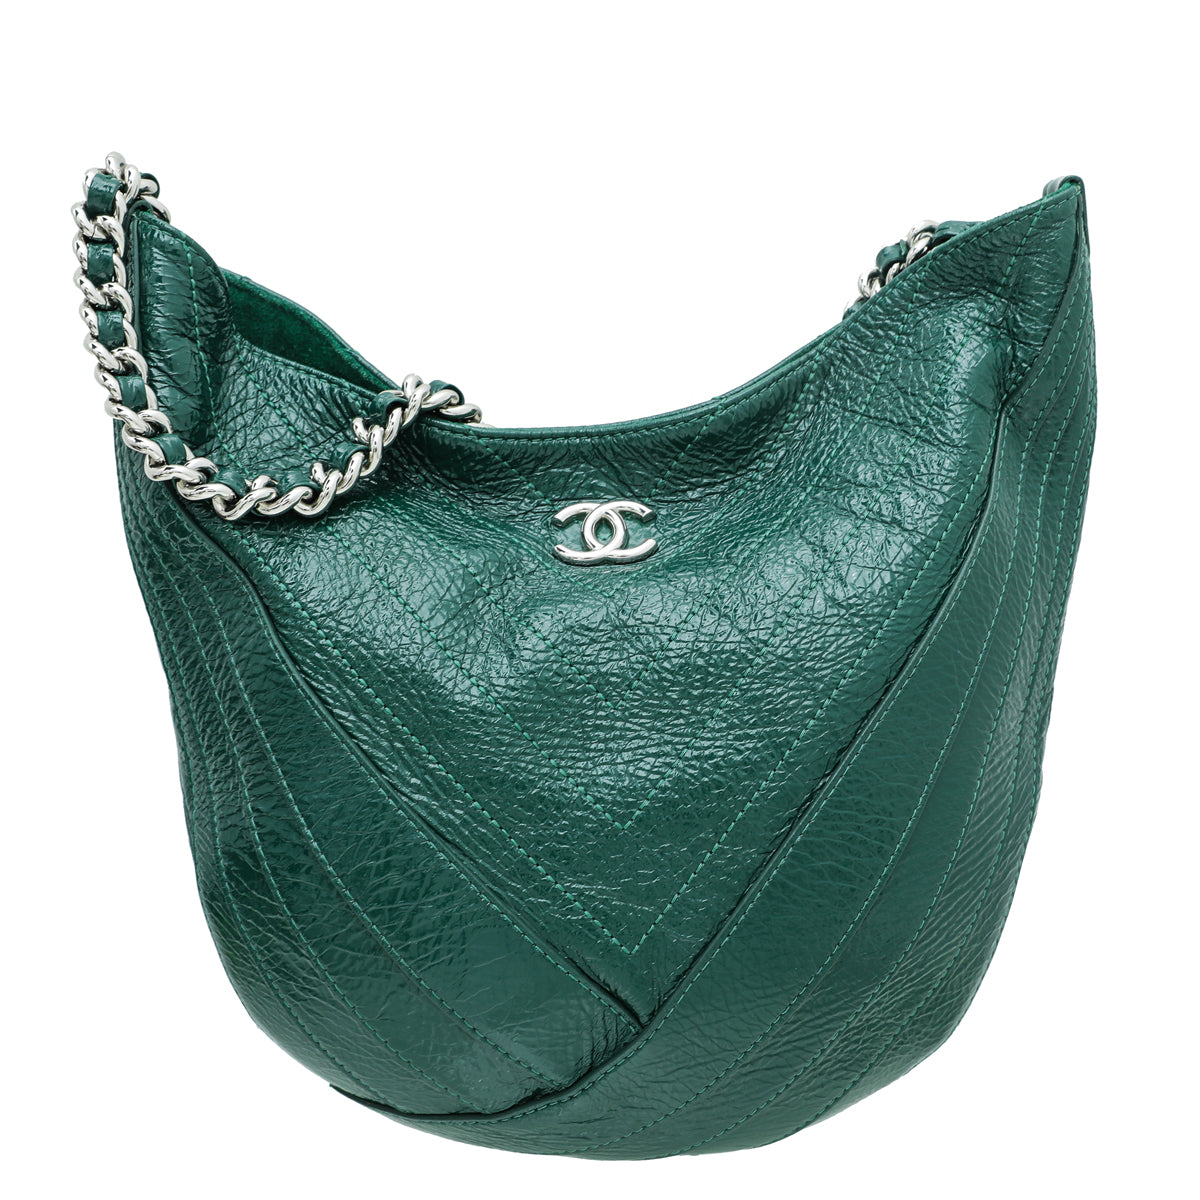 Chanel Small Hobo Bag AS3917 B10551 NM376, Green, One Size